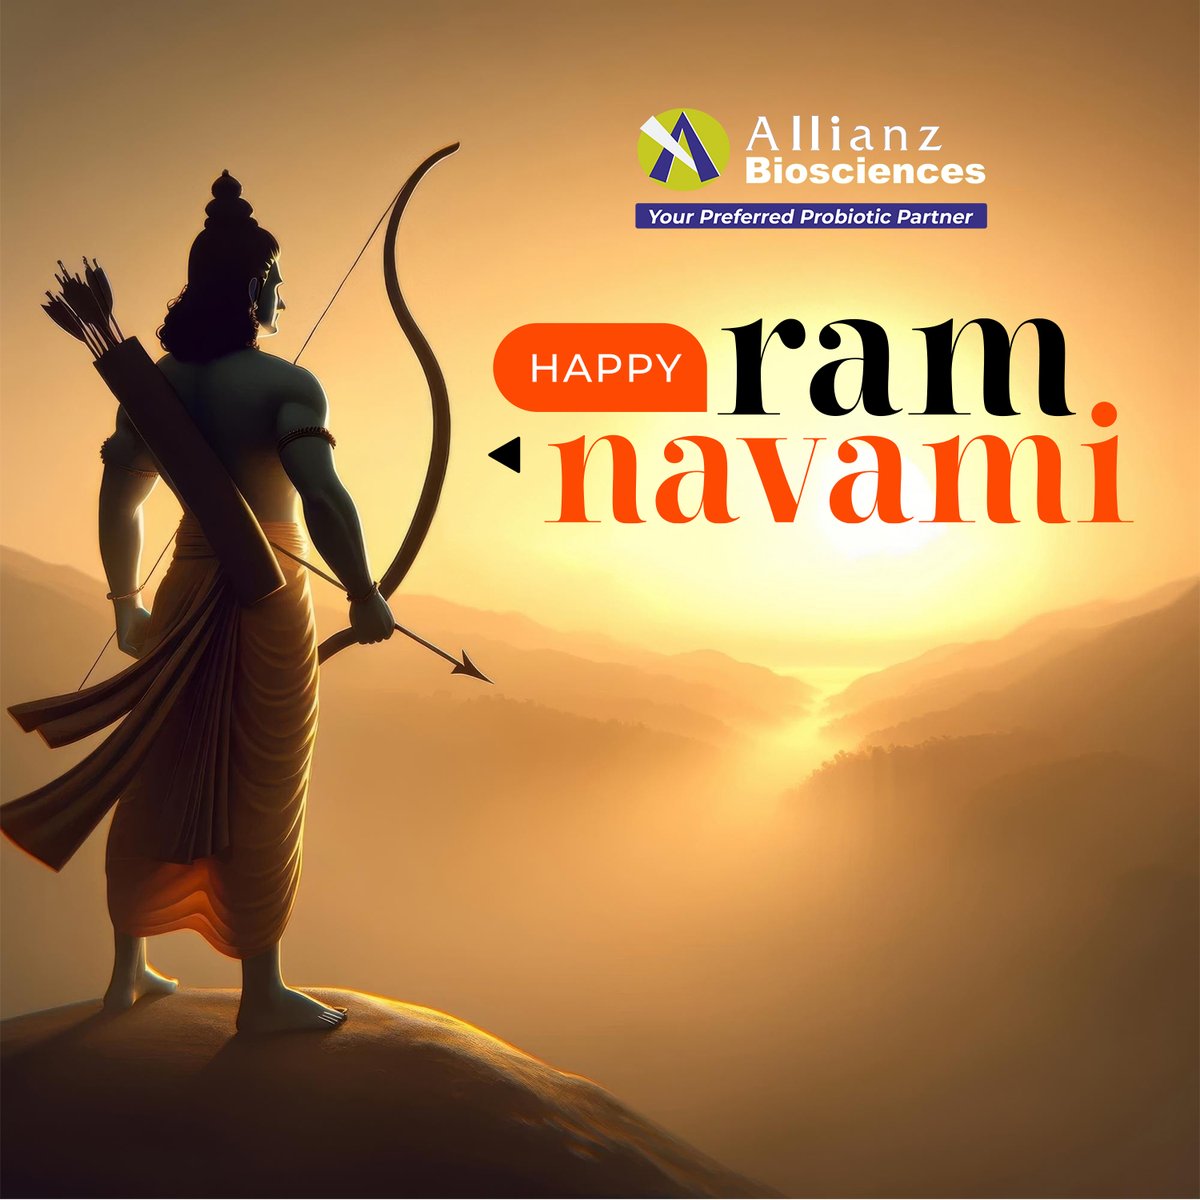 🌟 Happy Ram Navami from Allianz Biosciences! 🌟

On this auspicious occasion, may the blessings of Lord Ram fill your life with joy, prosperity, and harmony. Wishing you and your loved ones a blessed and blissful Ram Navami celebration! #RamNavami #Blessings #Prosperity #abpl